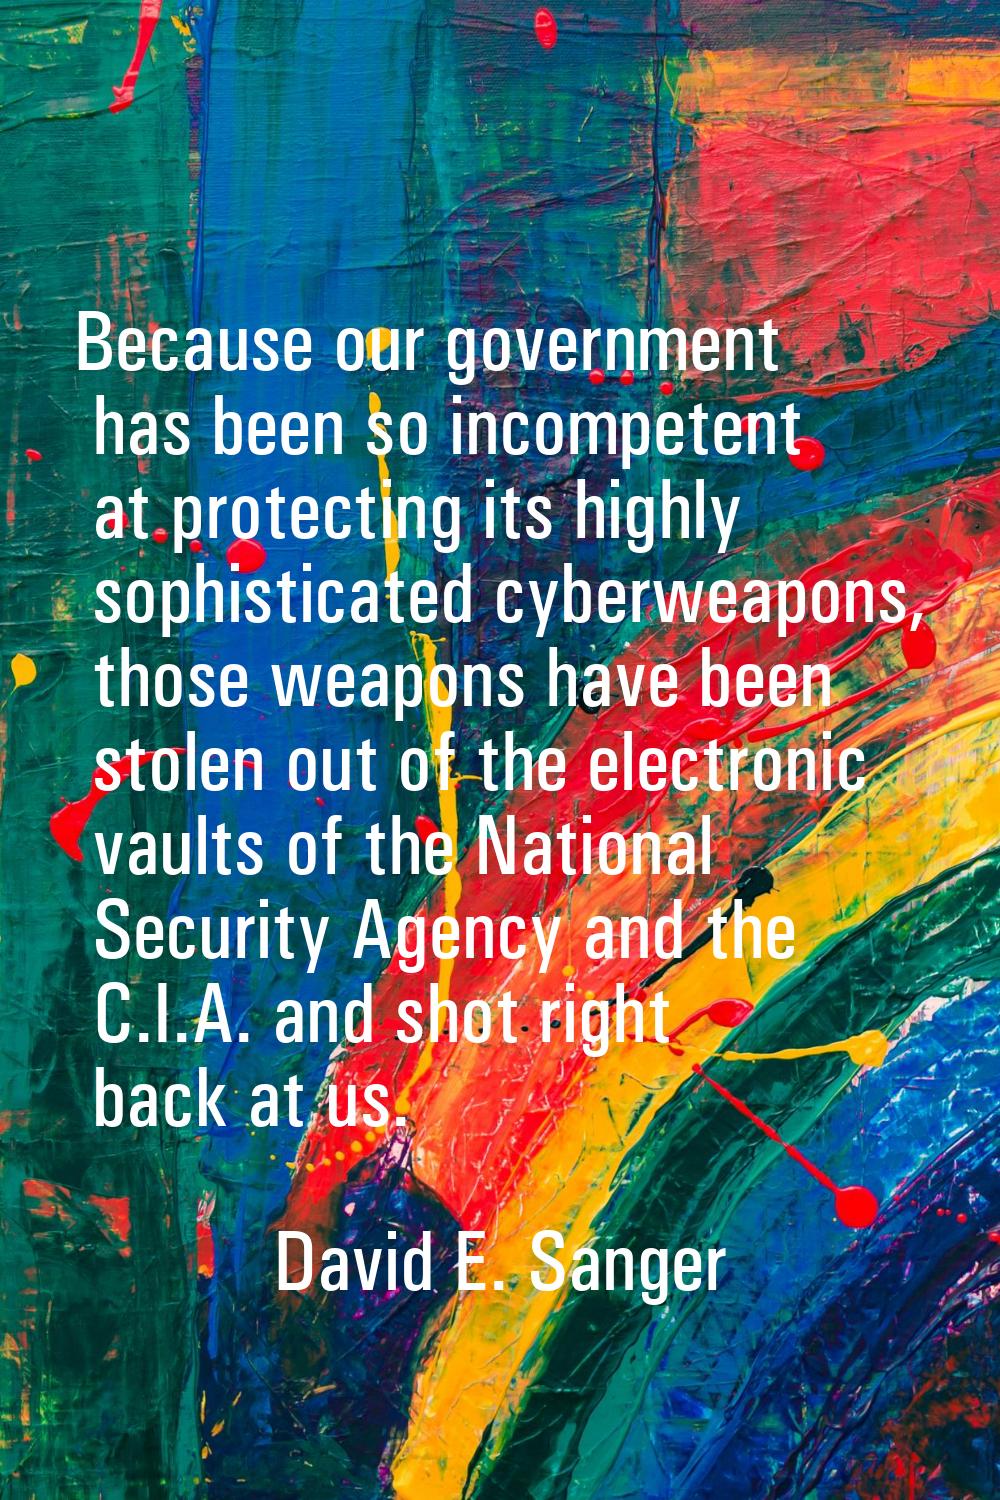 Because our government has been so incompetent at protecting its highly sophisticated cyberweapons,